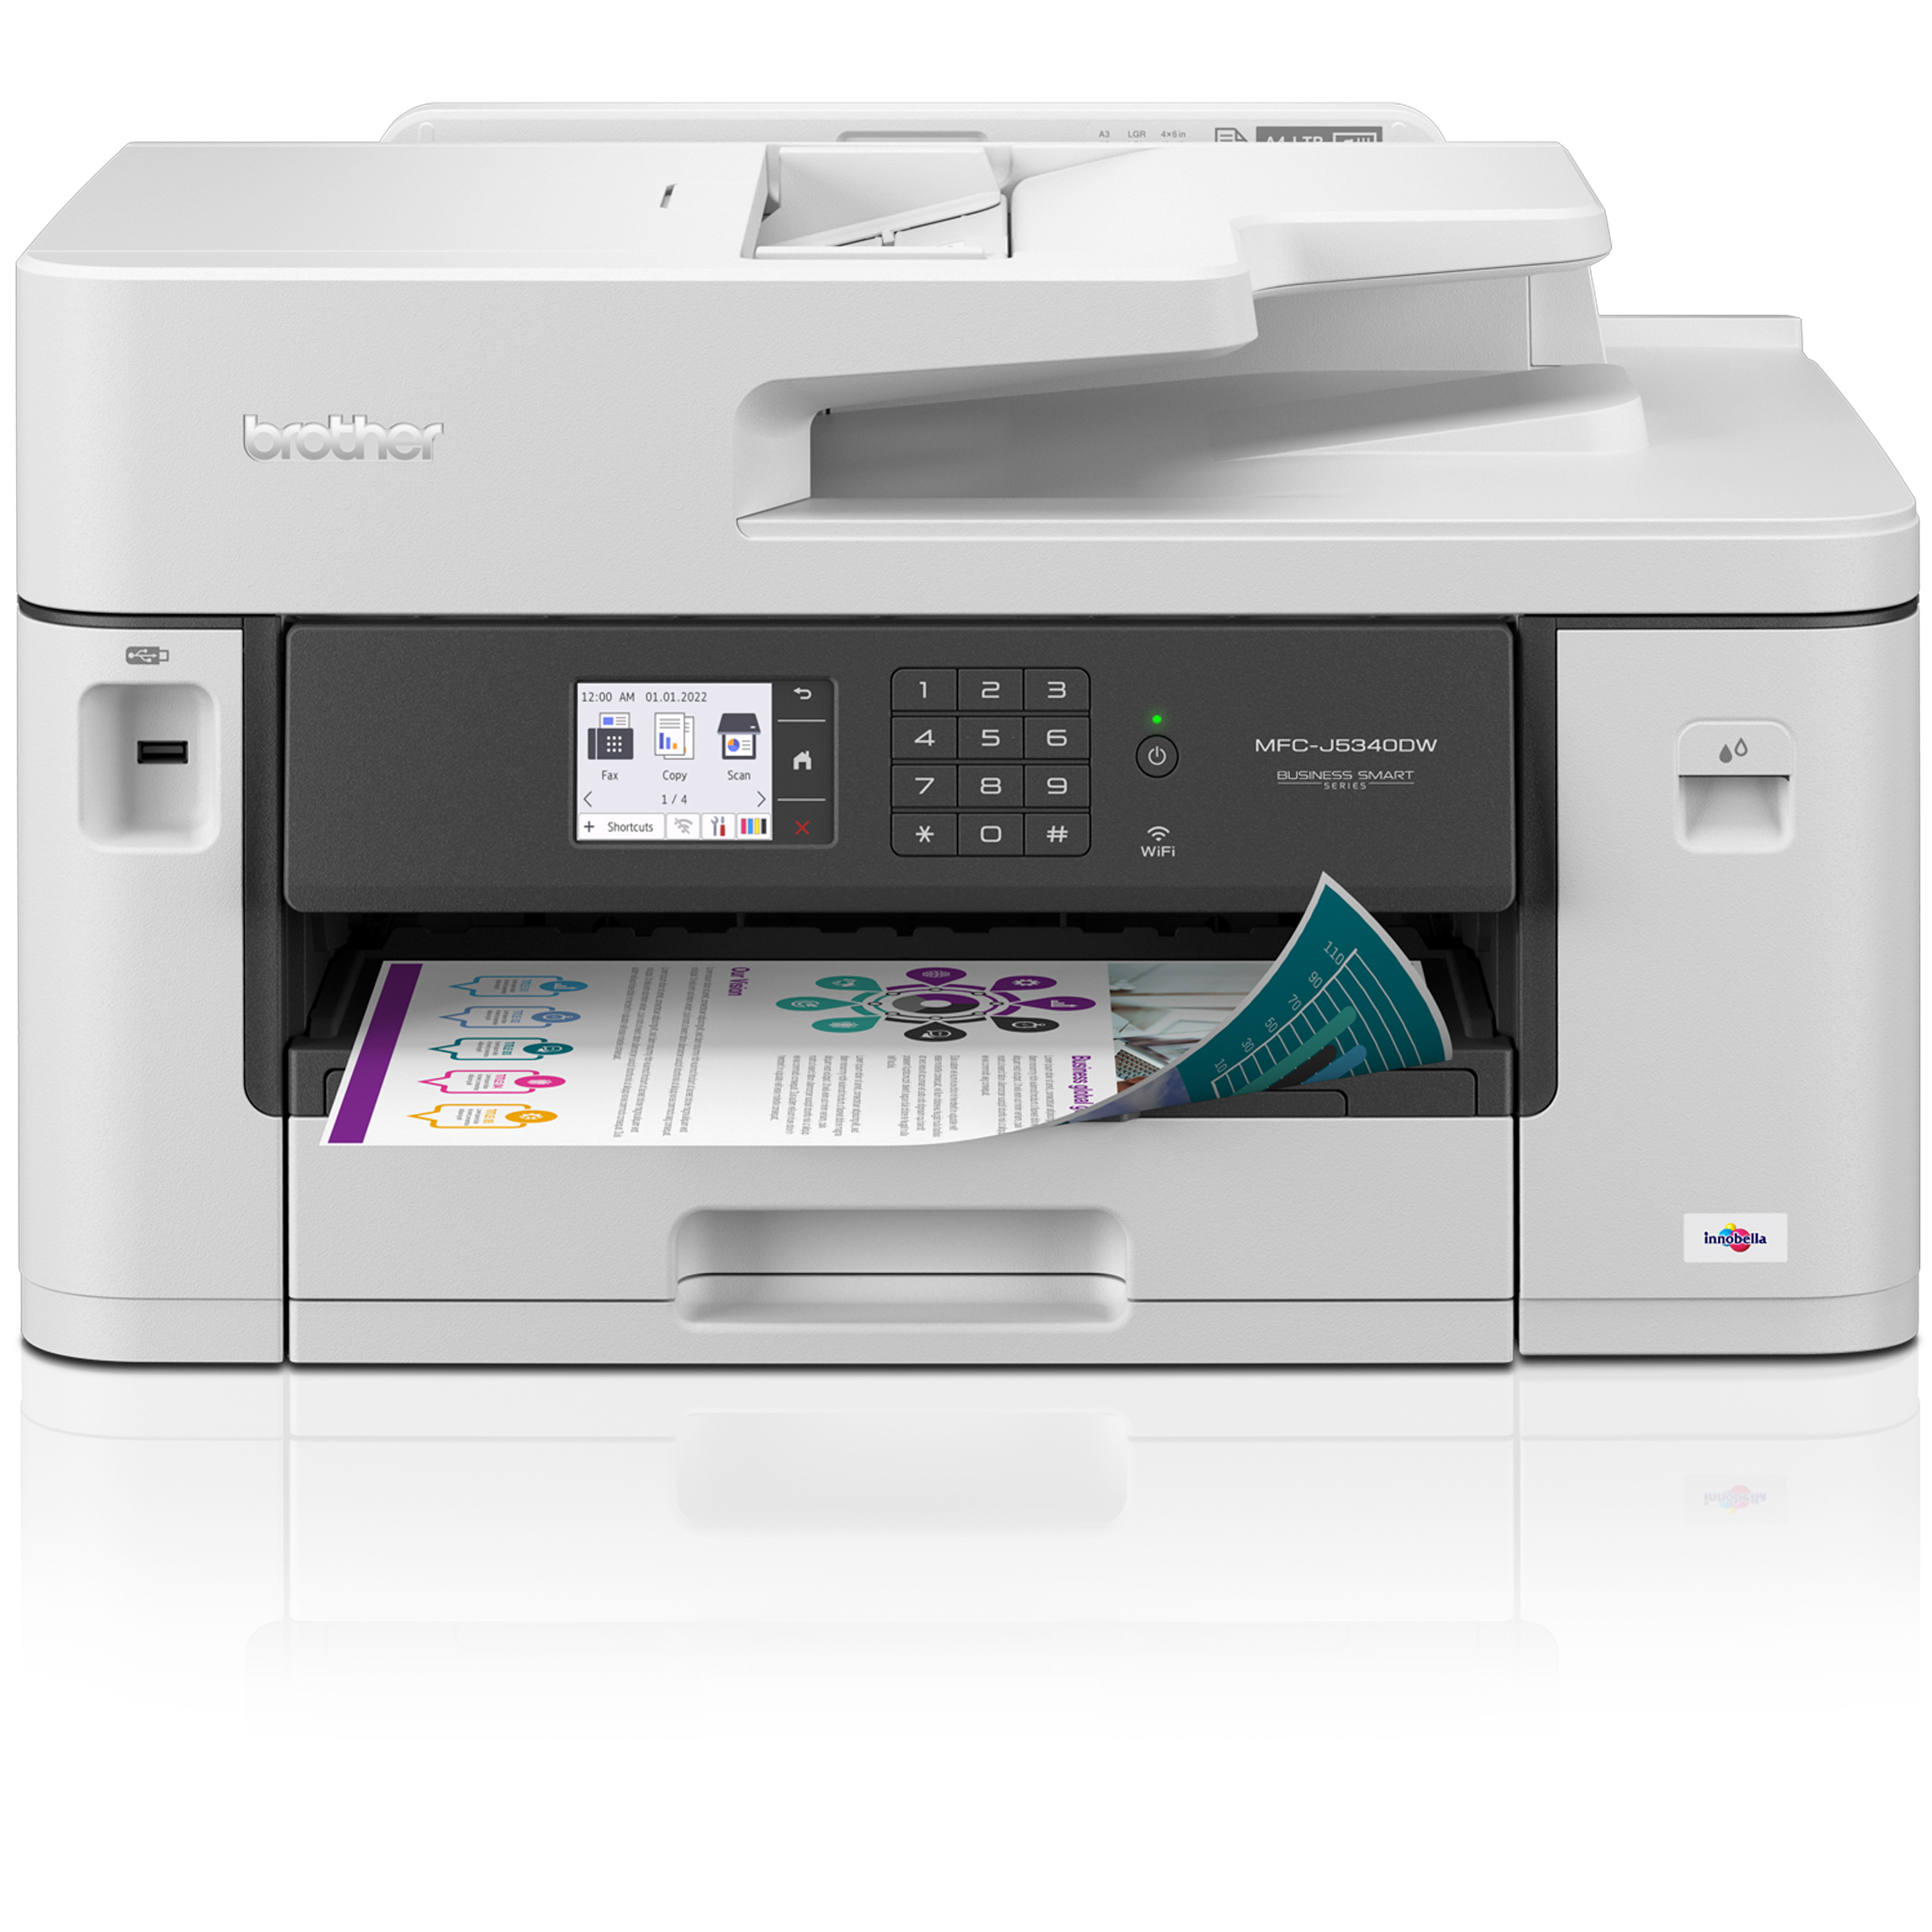 

Brother MFC-J5340DW Business Color Inkjet All-in-One Printer with printing up to 11"x17" (Ledger) size capabilities with Refresh